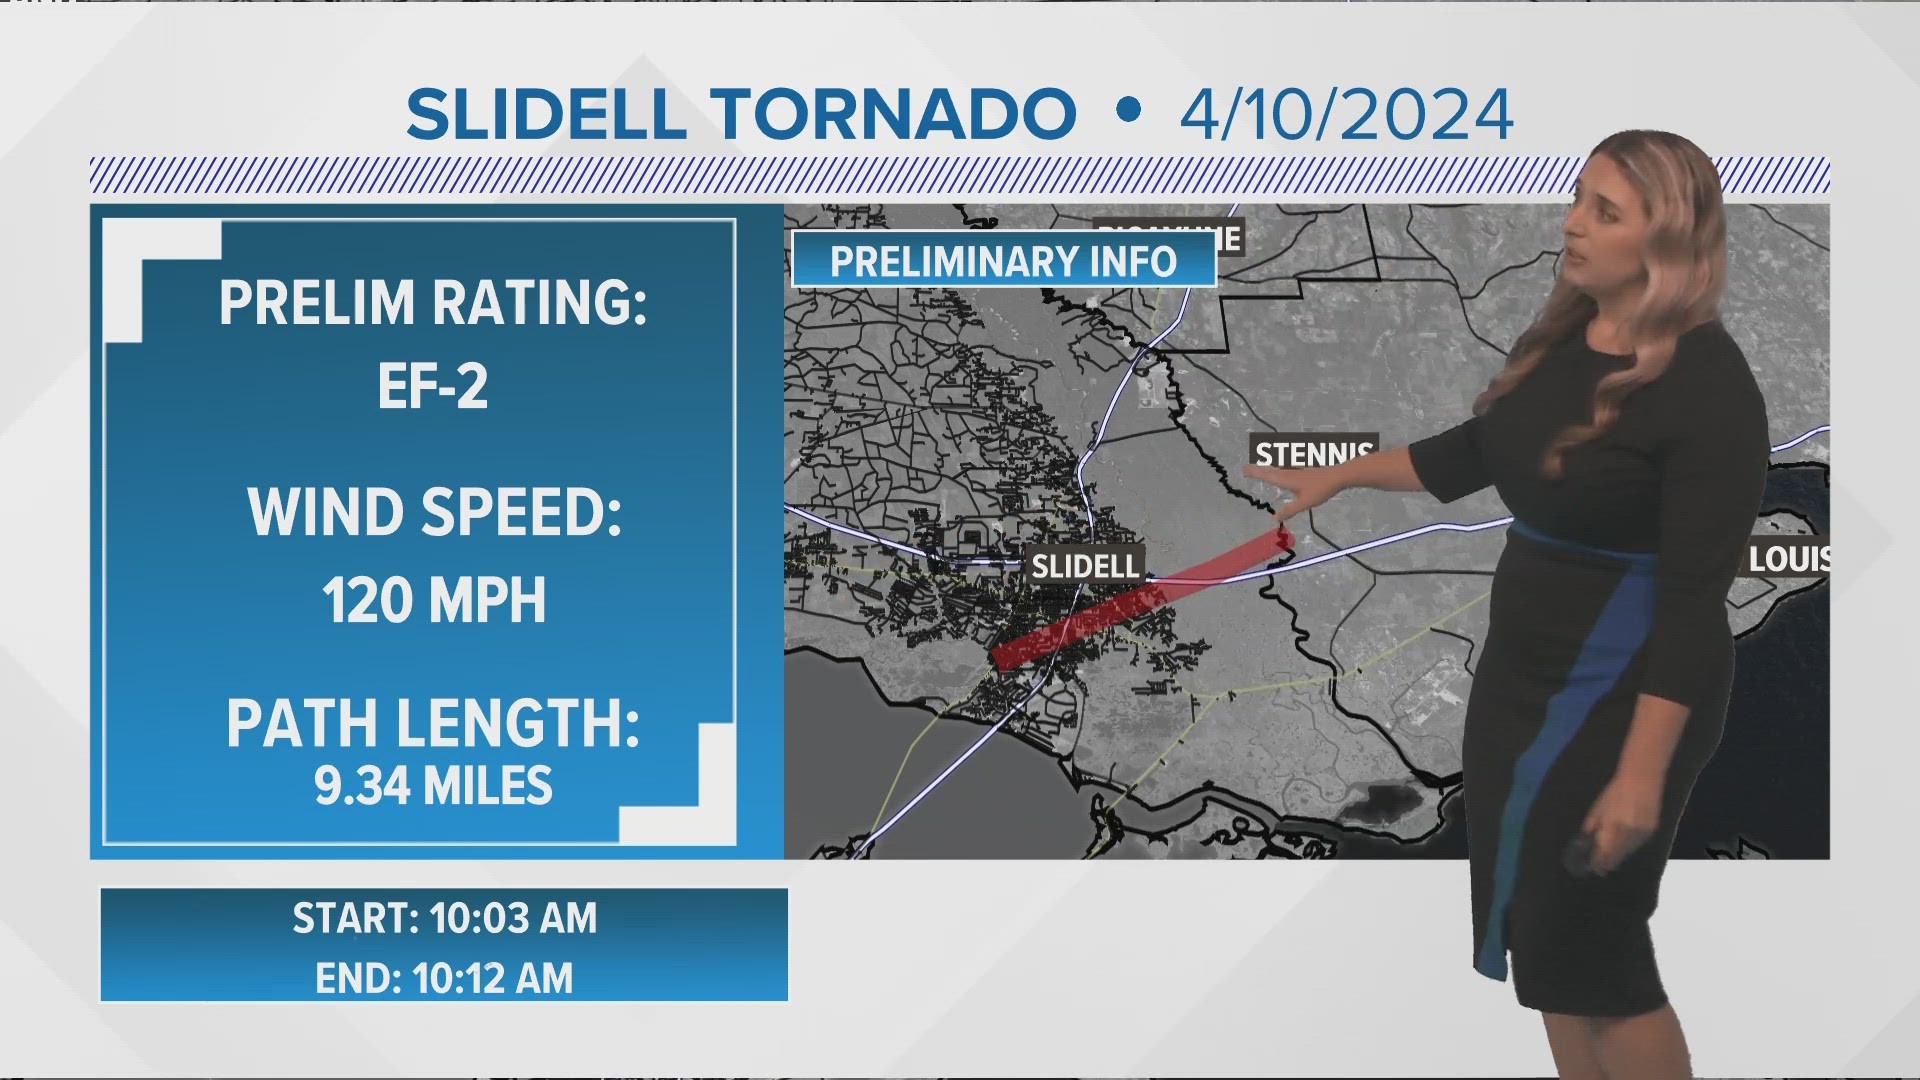 The National Weather Service said it was a strong EF-2 tornado that struck Slidell, Louisiana and its path was 9 miles long and it was 3 football fields wide.